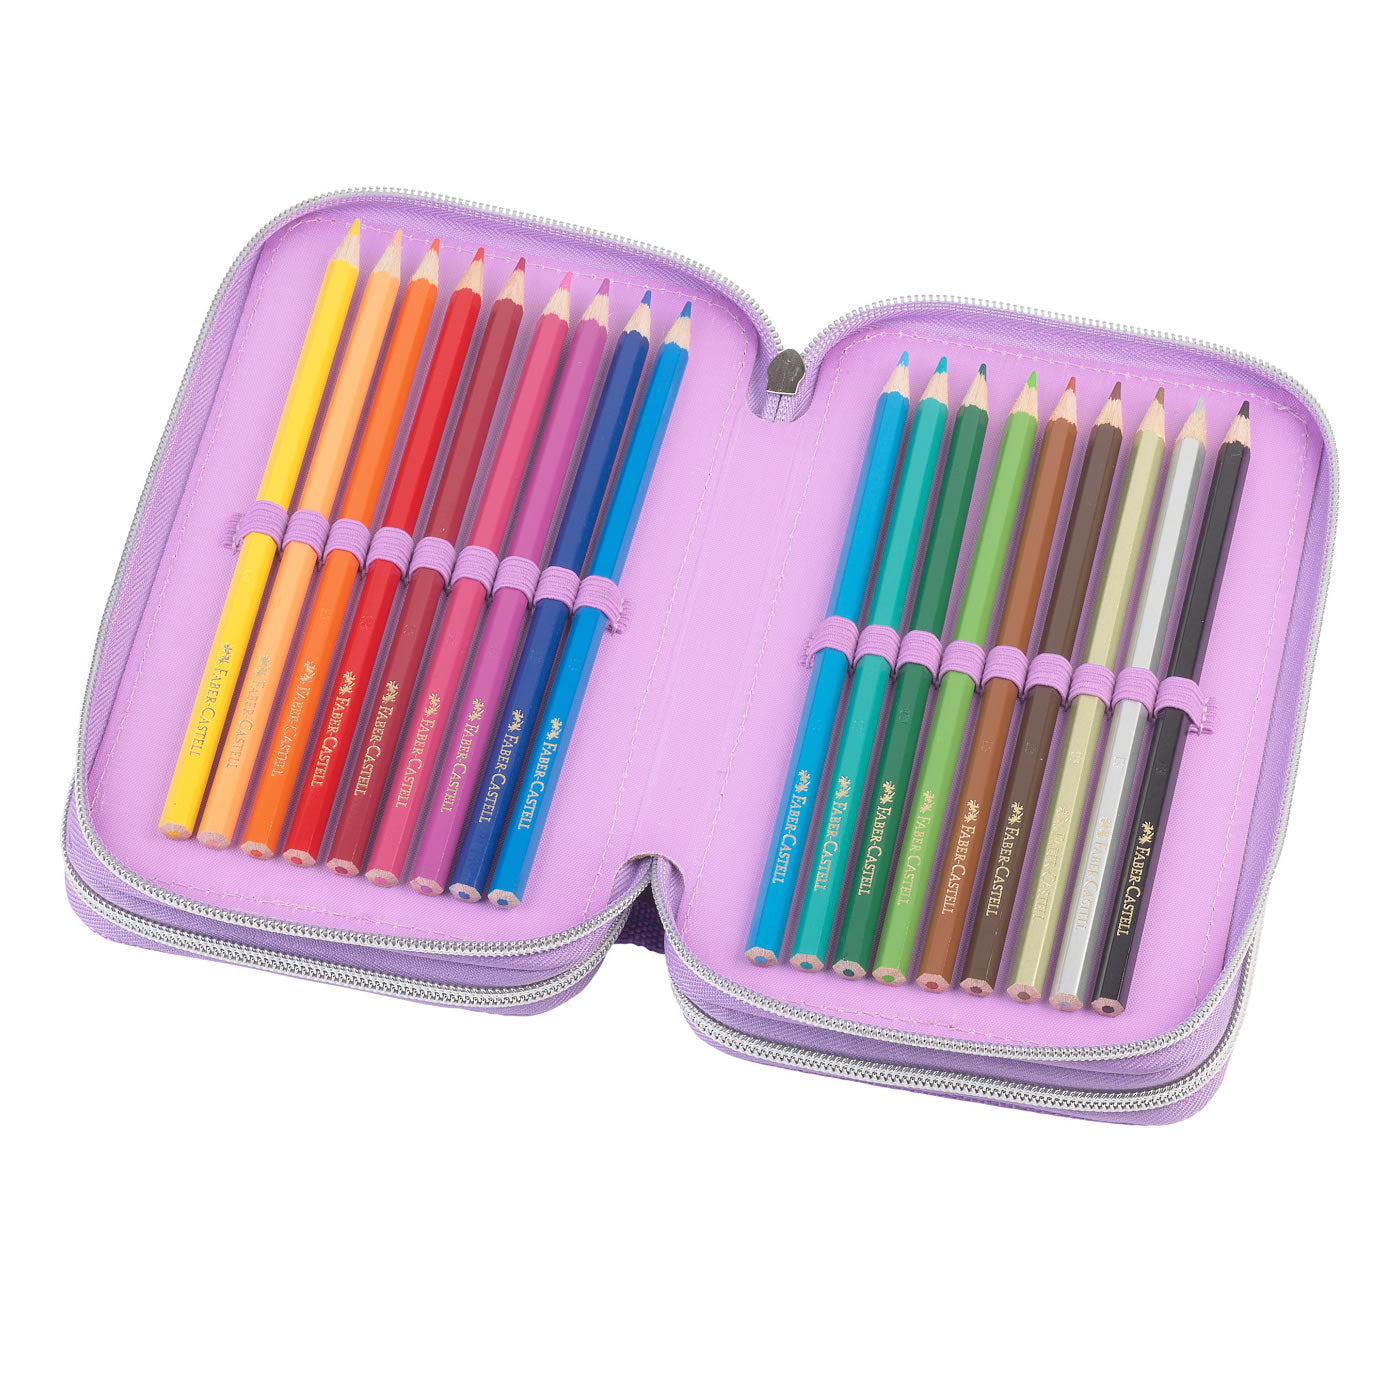 Faber-Castell Triple Decker Pencil Case with 3 Zips - Unicorn Edition